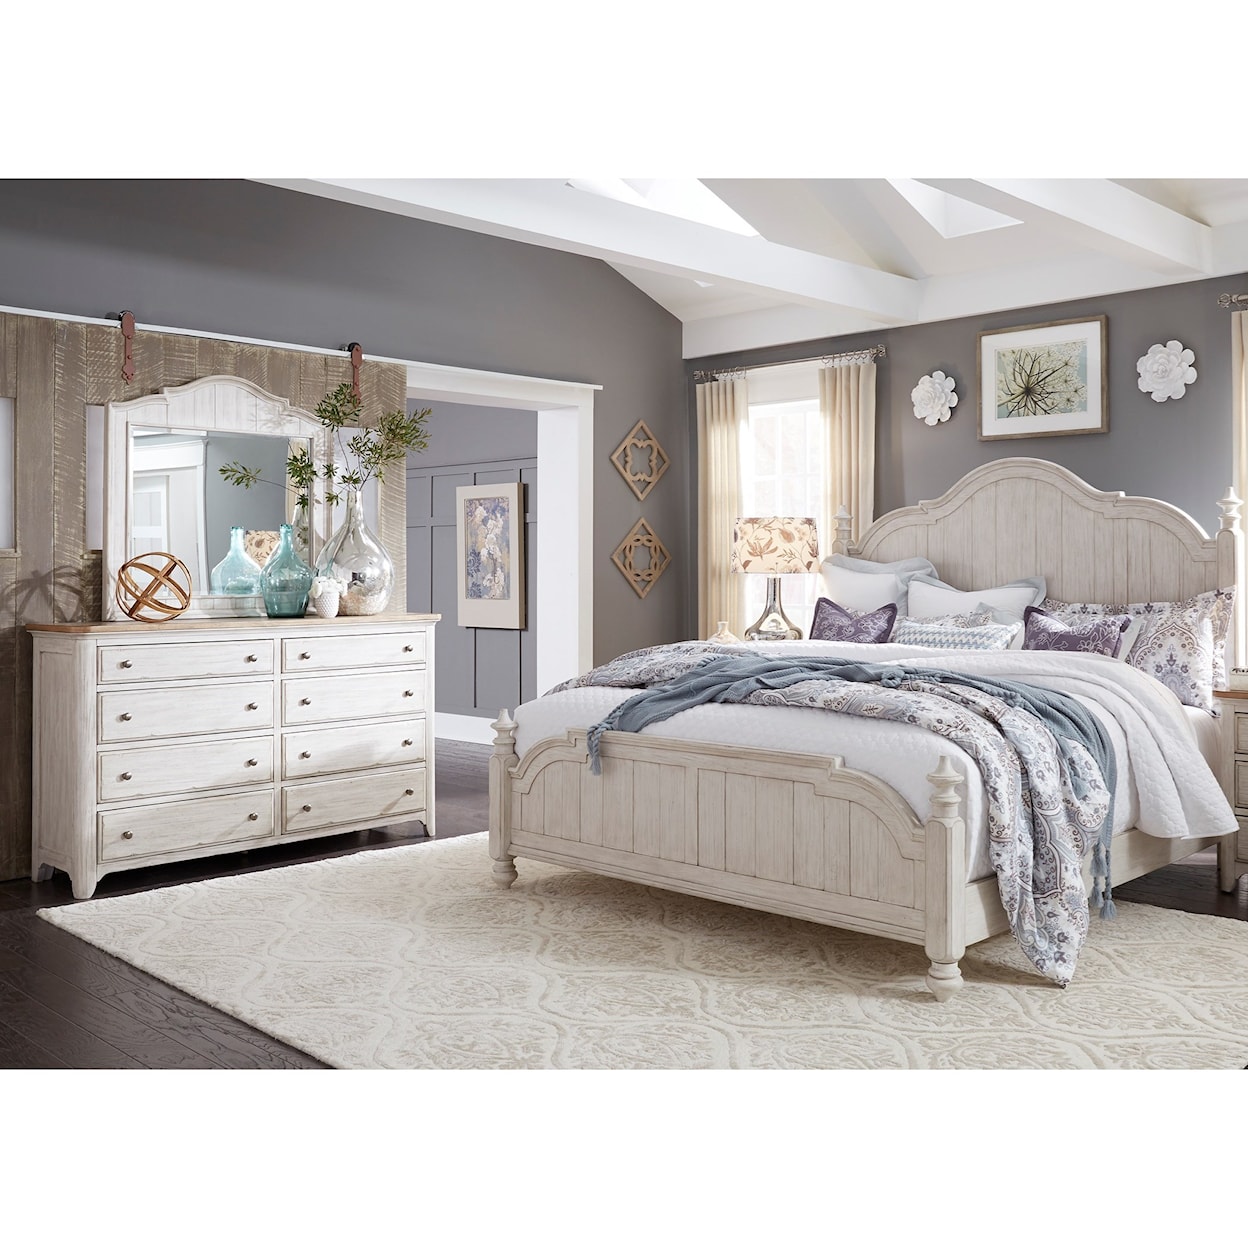 Libby Farmhouse Reimagined Queen Bedroom Group